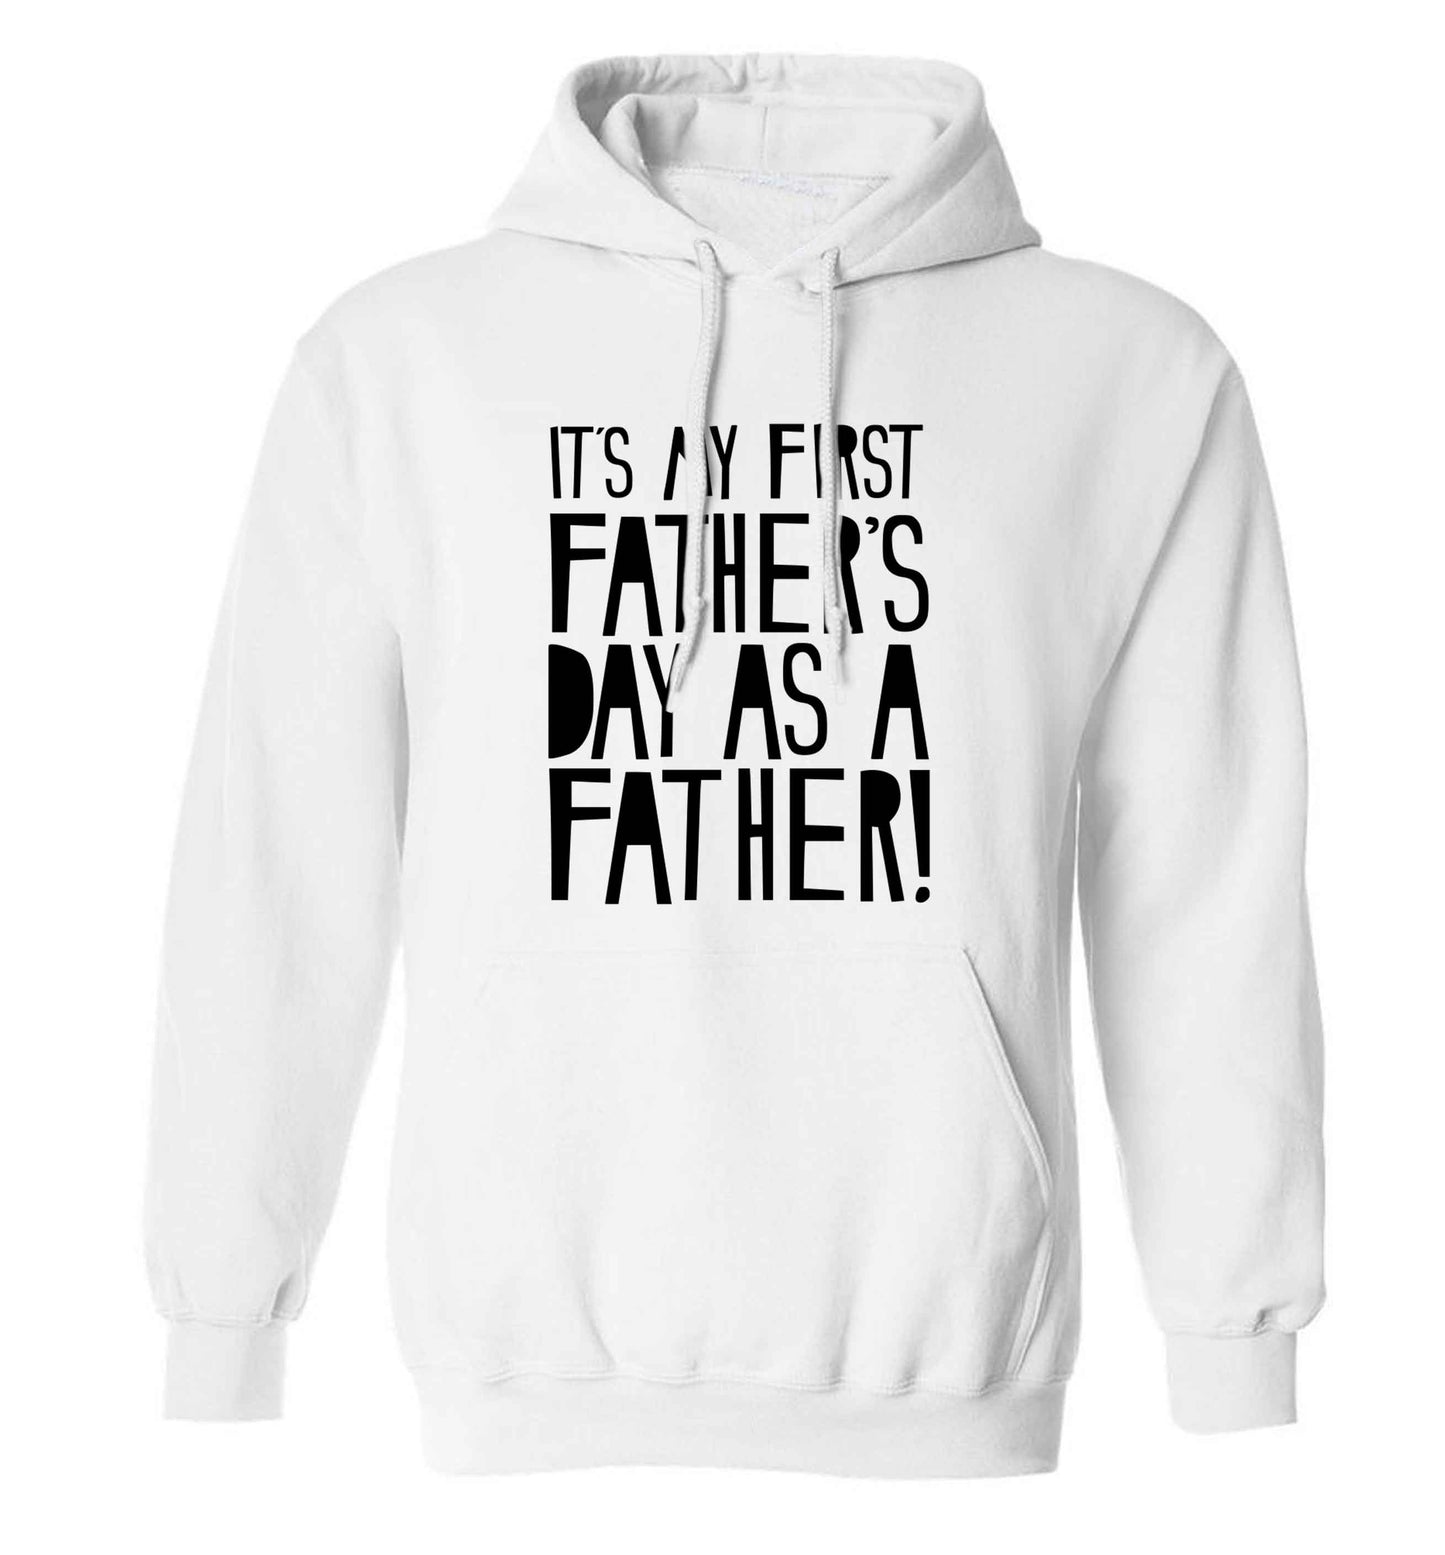 It's my first father's day as a father! adults unisex white hoodie 2XL